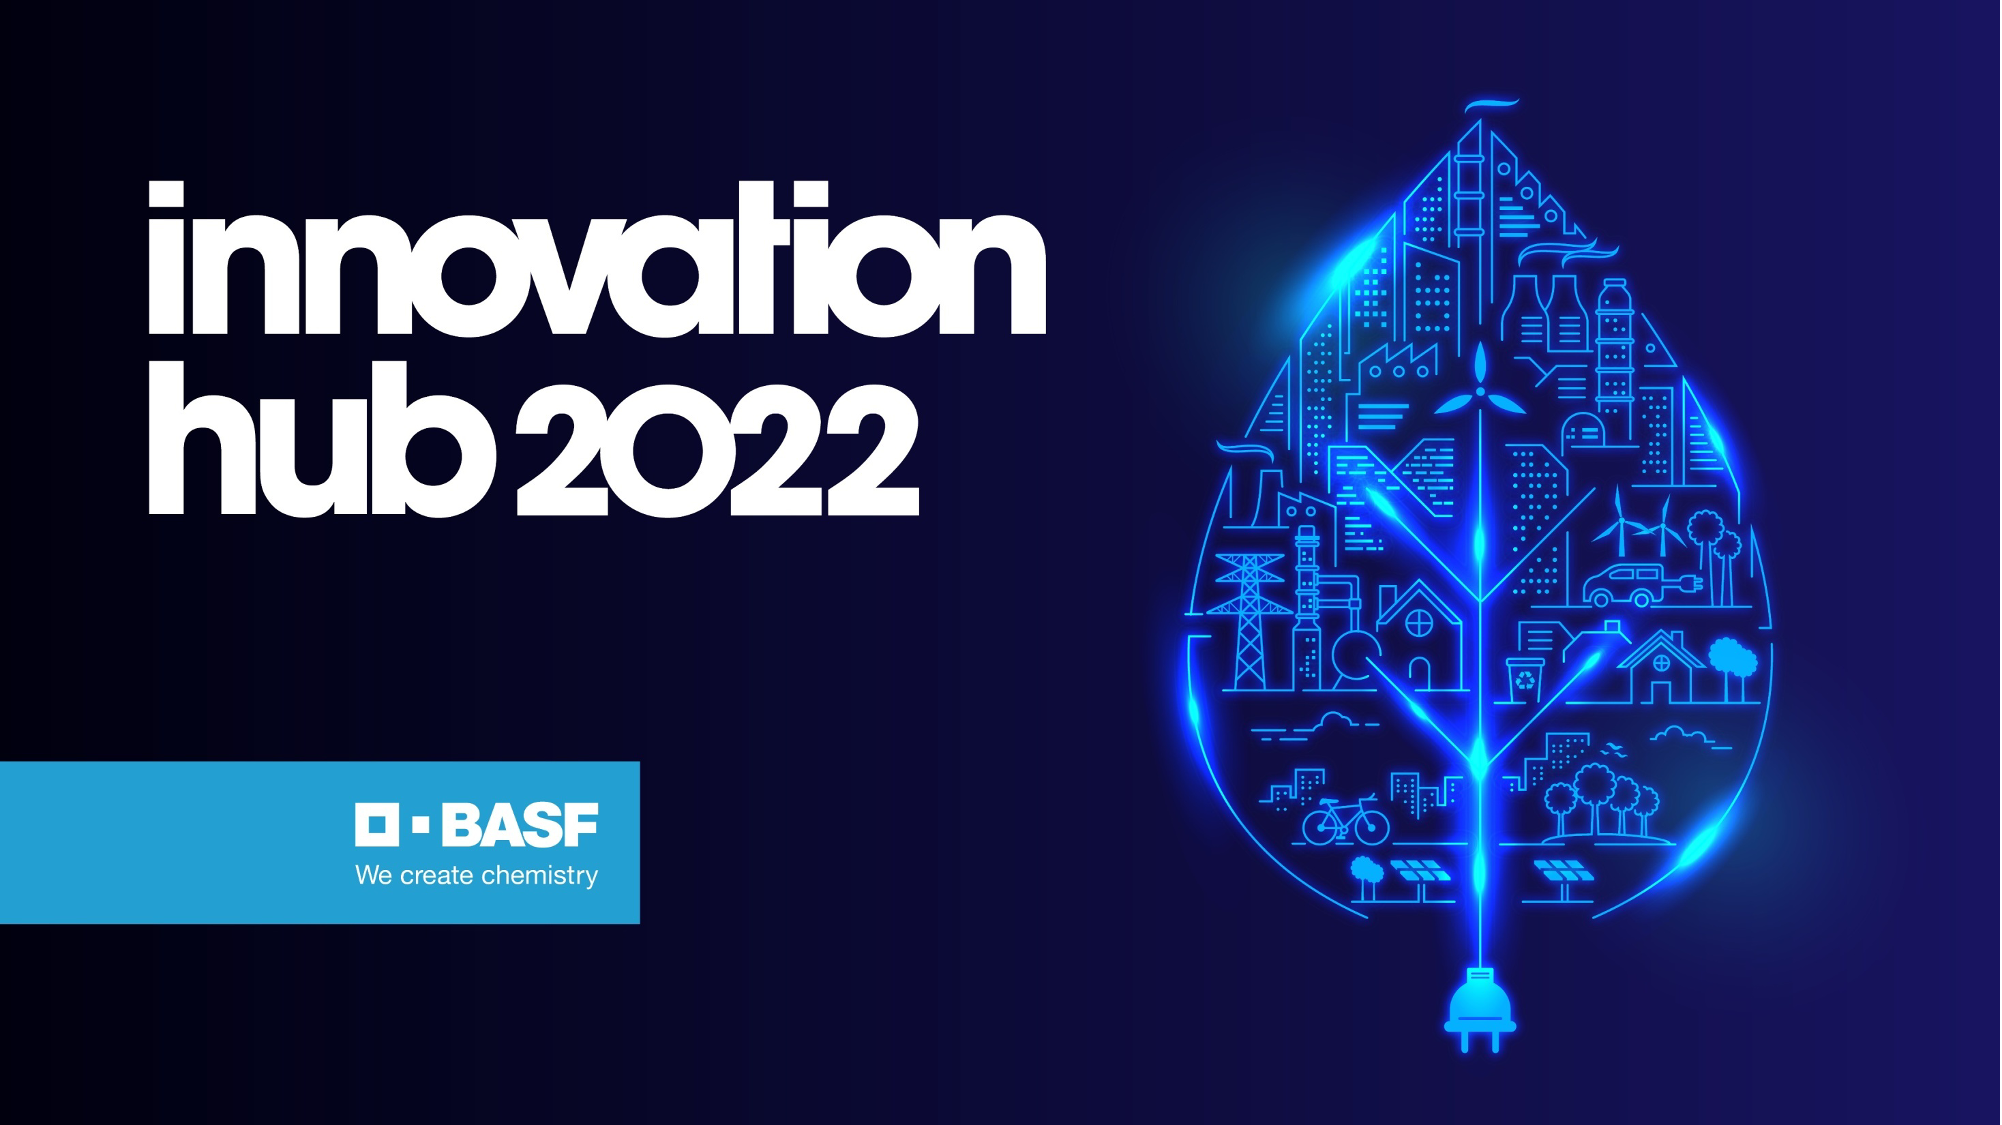 BASF and AHK Romania announce the extension of the application deadline for Innovation Hub 2022 Competition until 30th  September 2022